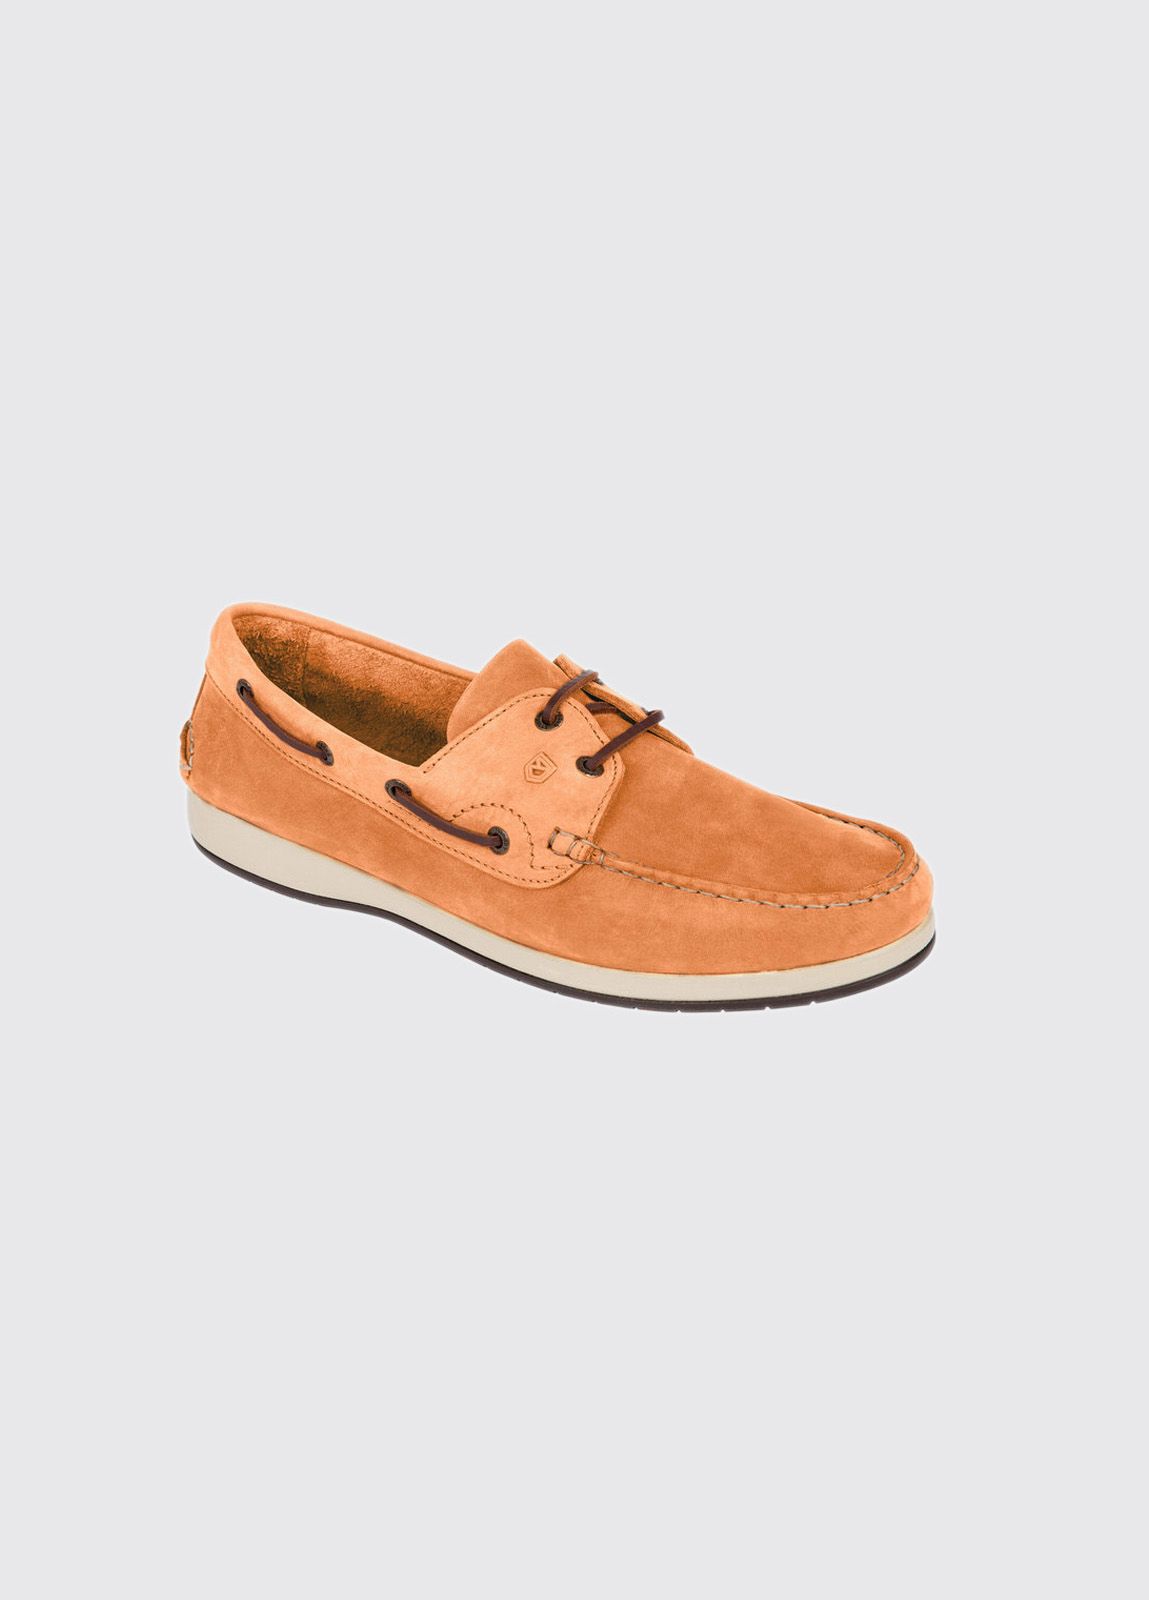 Pacific X LT Deck Shoe - Whiskey